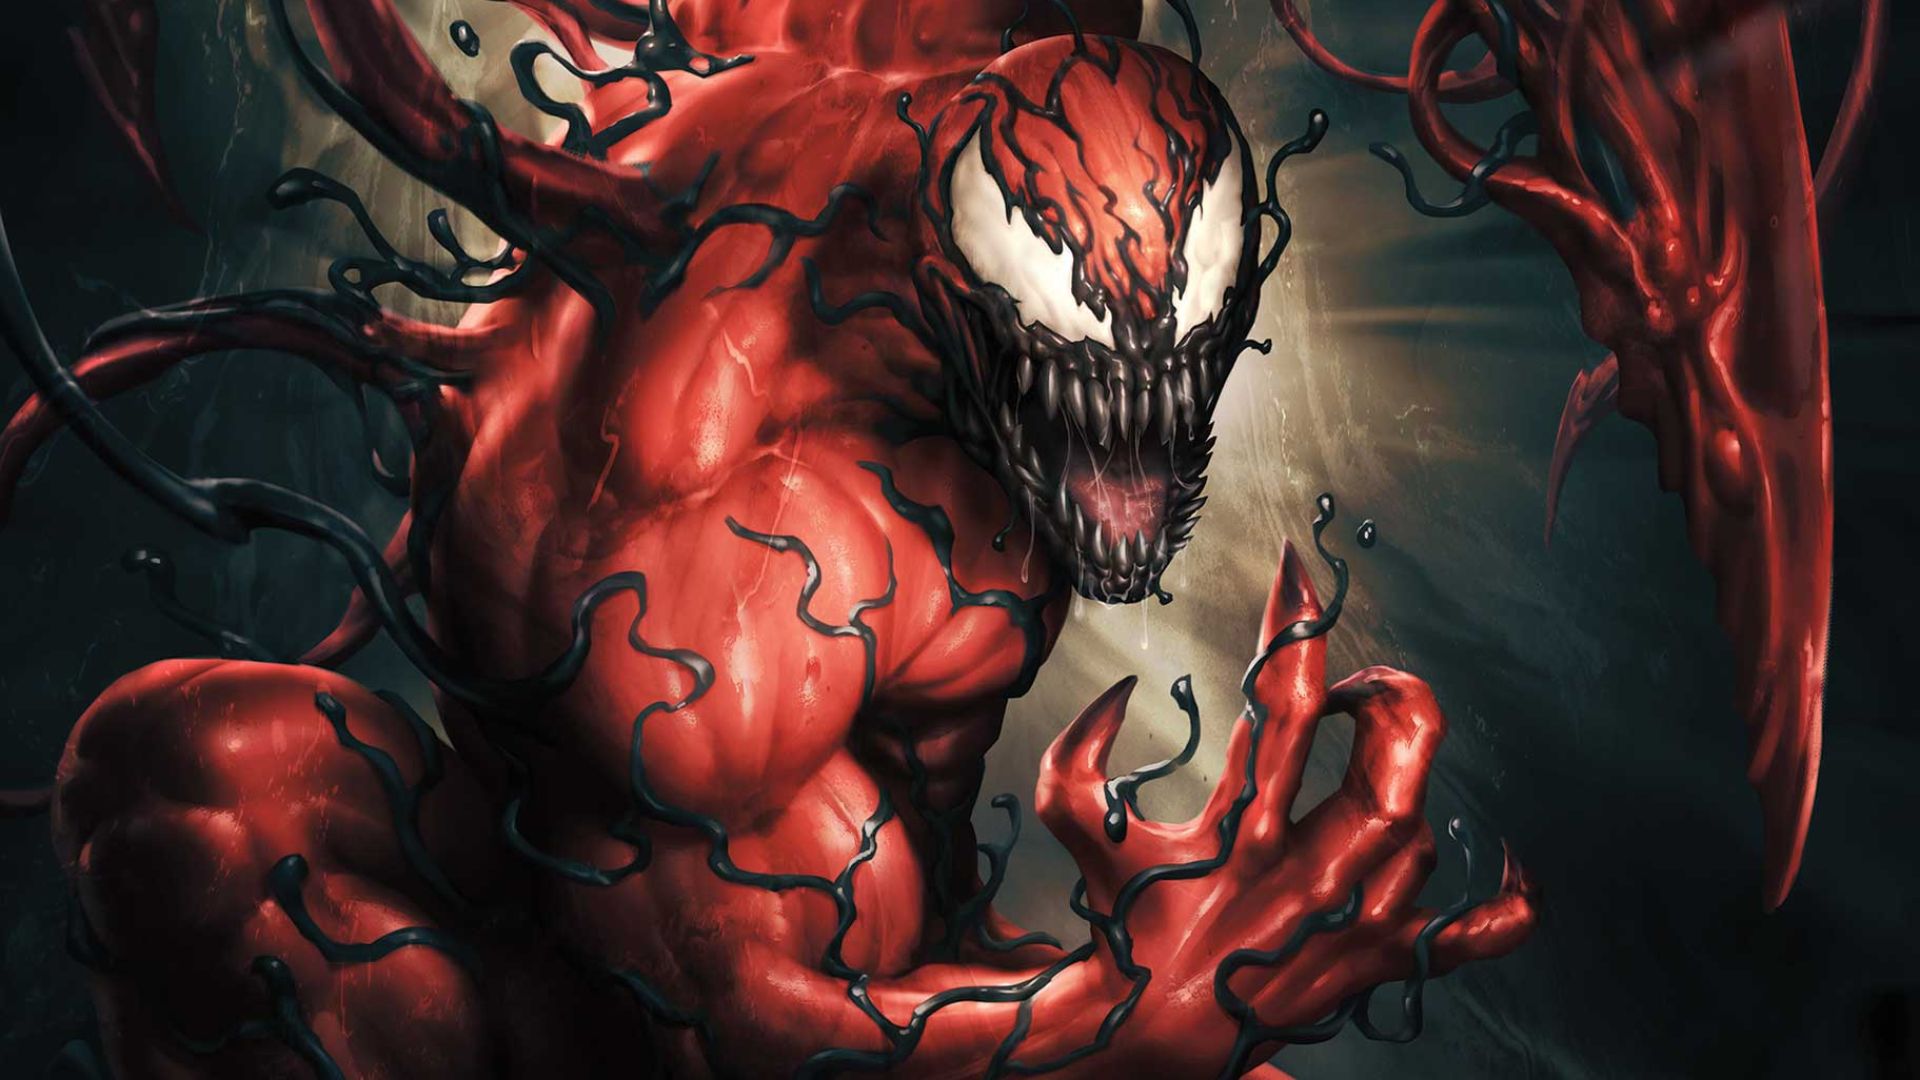 Carnage takes the spotlight in 2022 solo title from Venom co-writer |  GamesRadar+